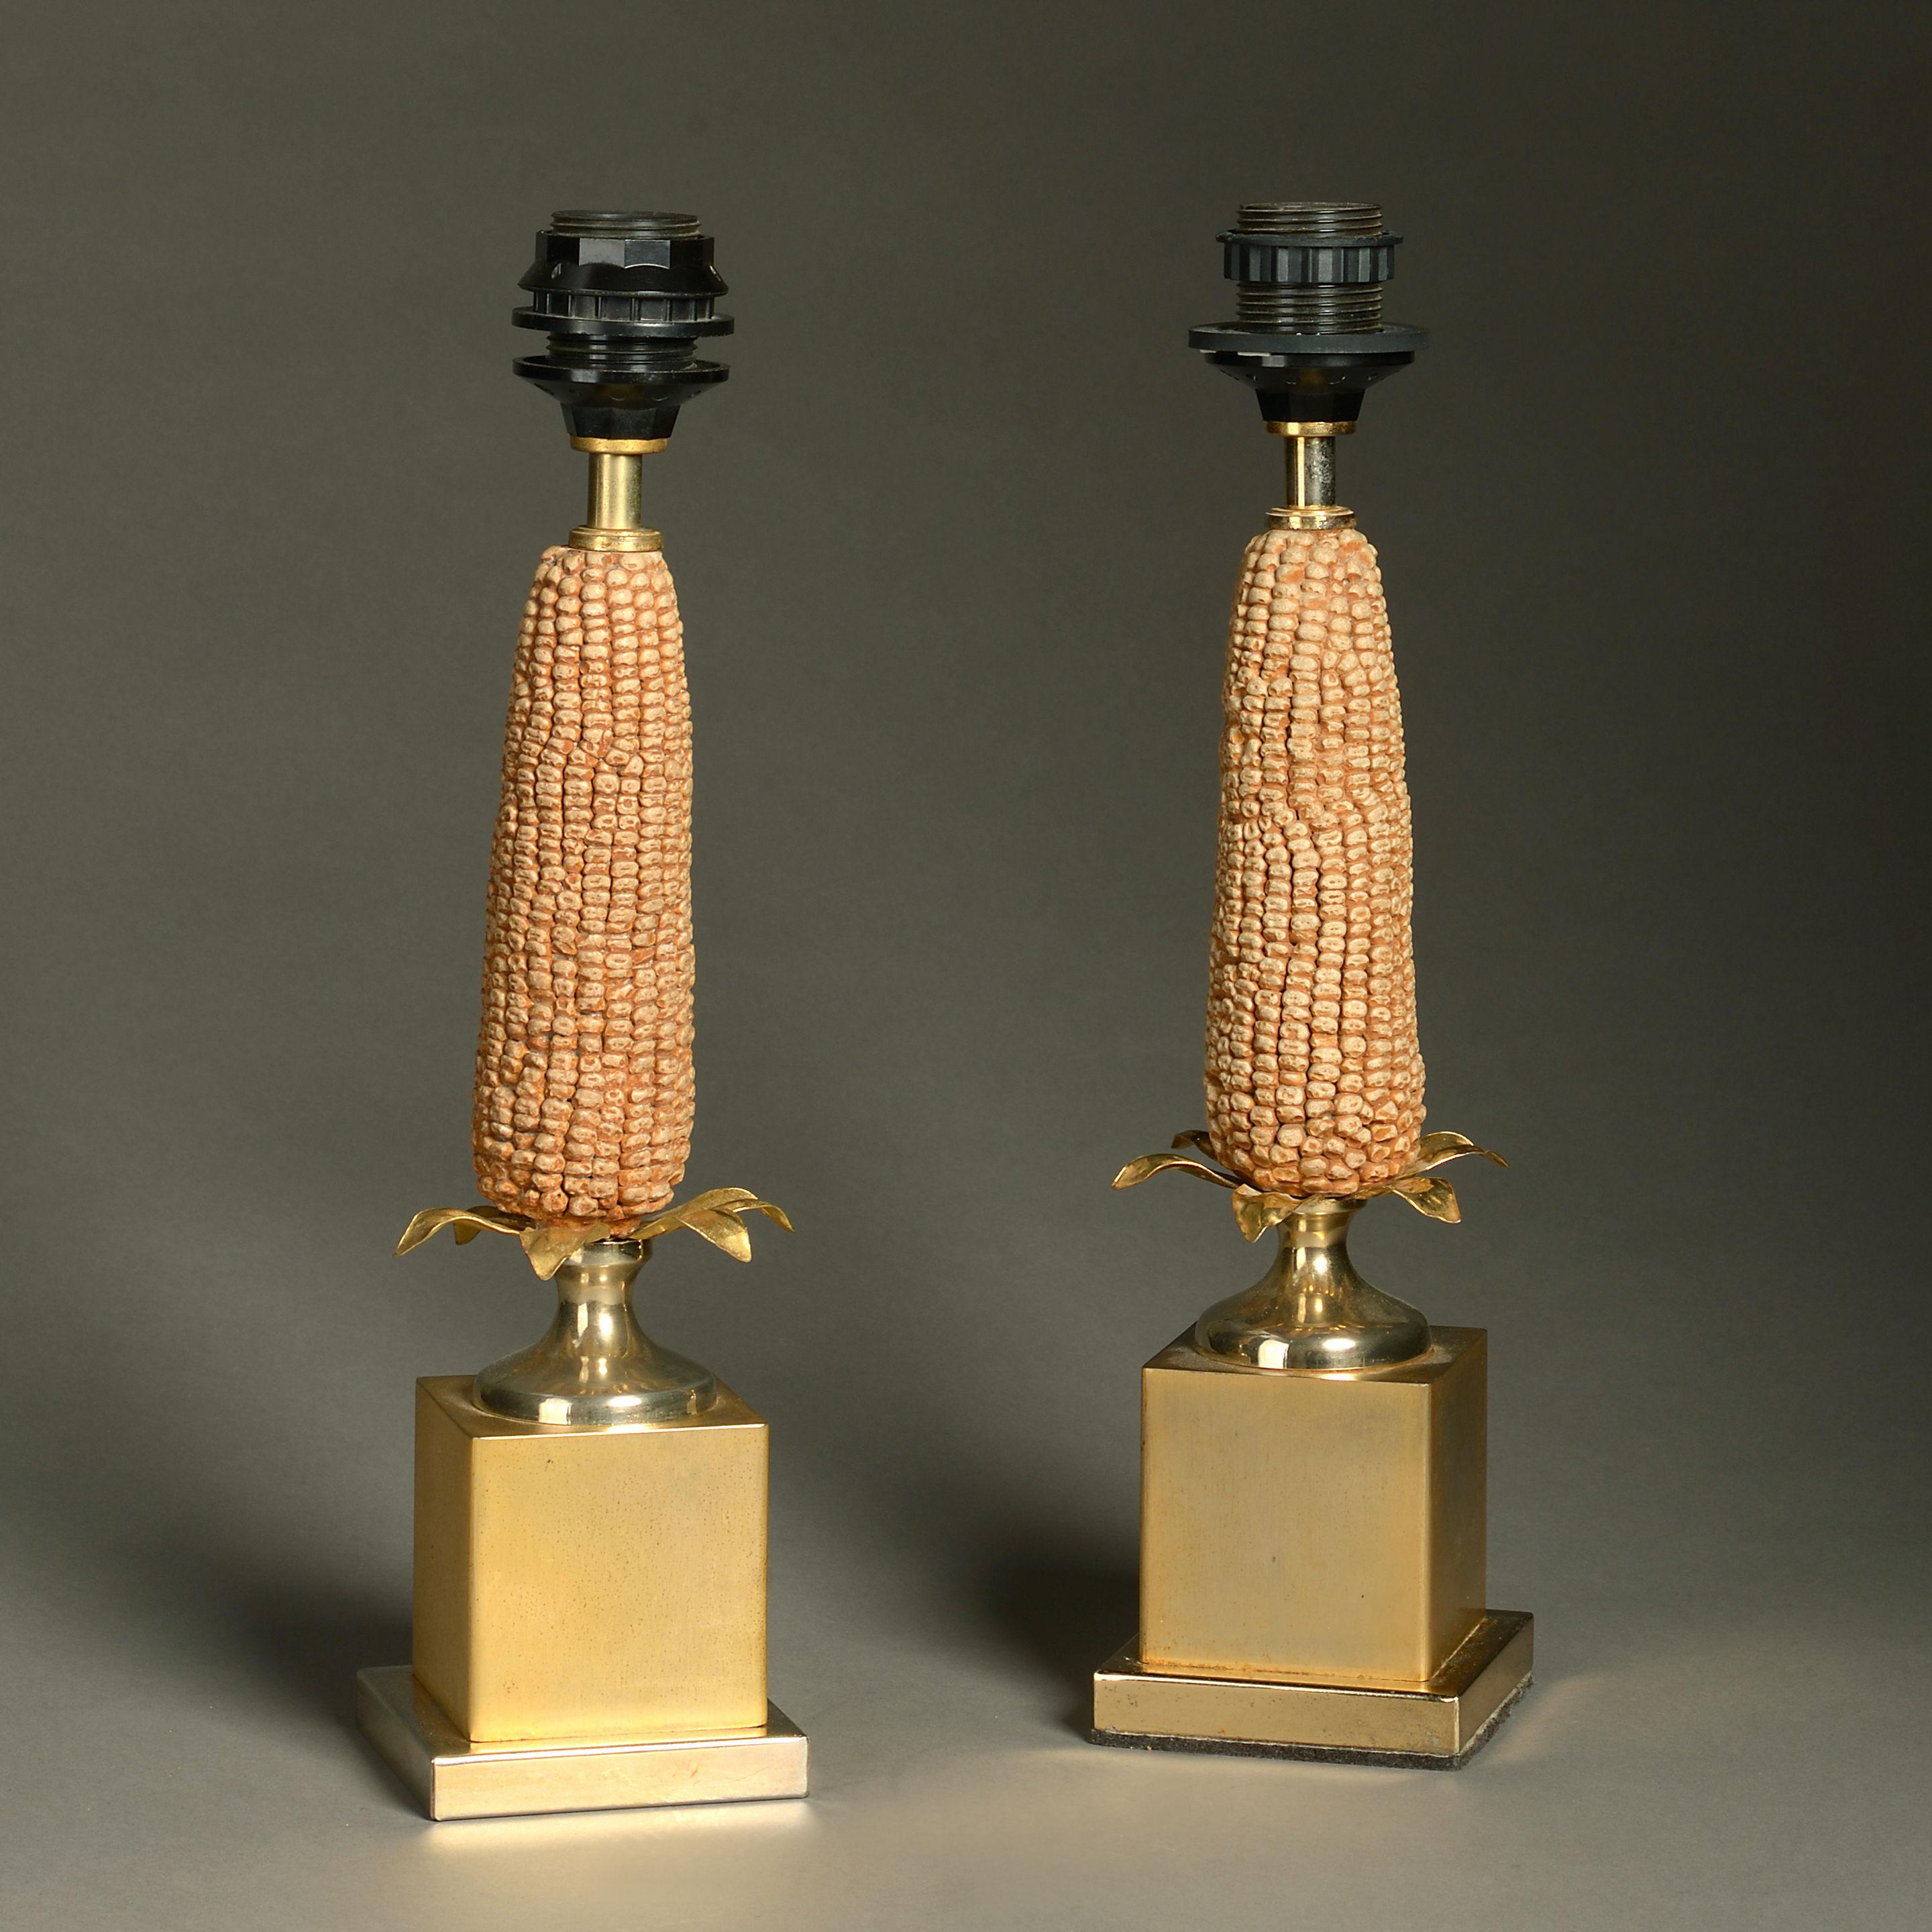 An unusual mid-20th century pair of lamp bases in the manner of Maison Charles, the square gilt metal bases supporting ceramic corn cobs and supporting black shades with gilded interiors. 

Dimensions refer to height of lamp bases (excluding